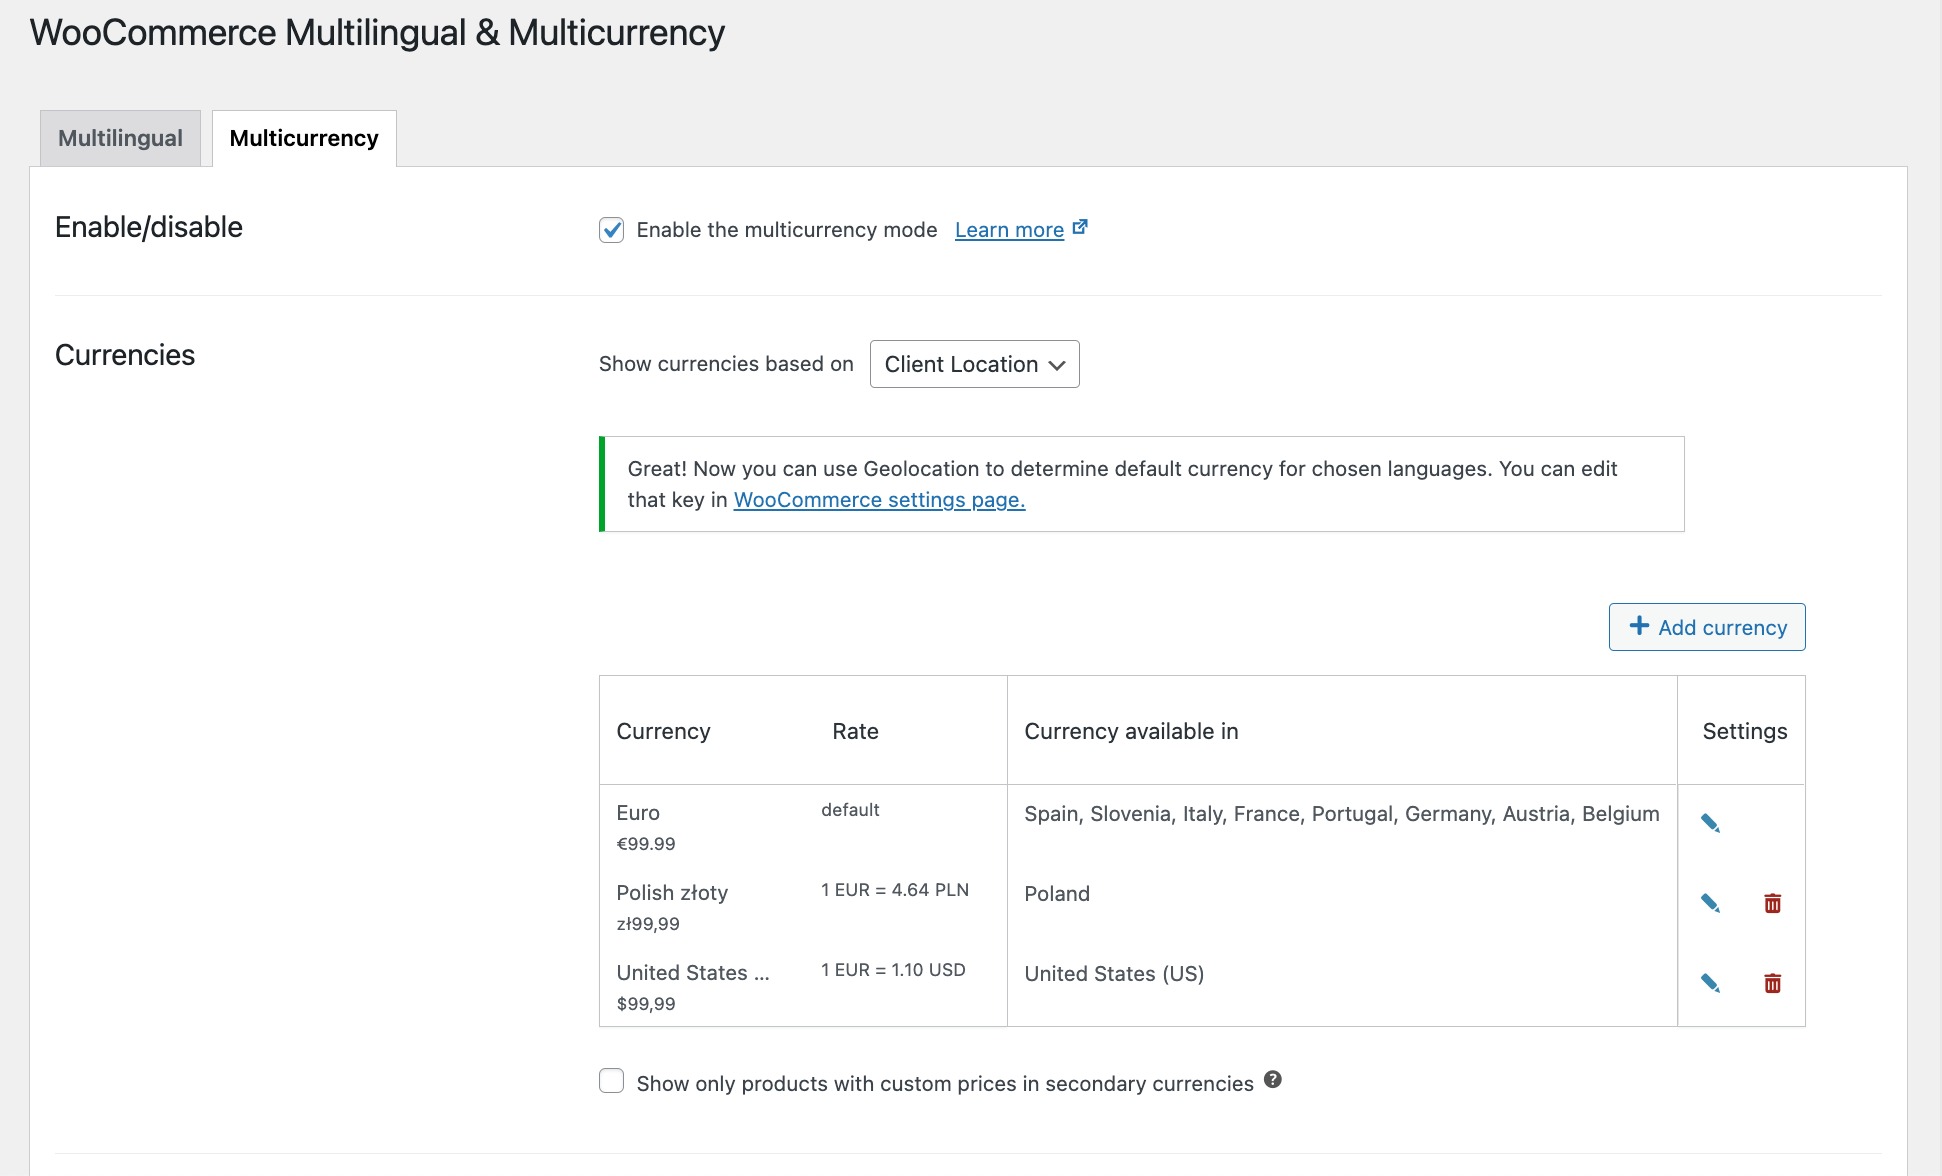 WooCommerce Multilingual - Multicurrency